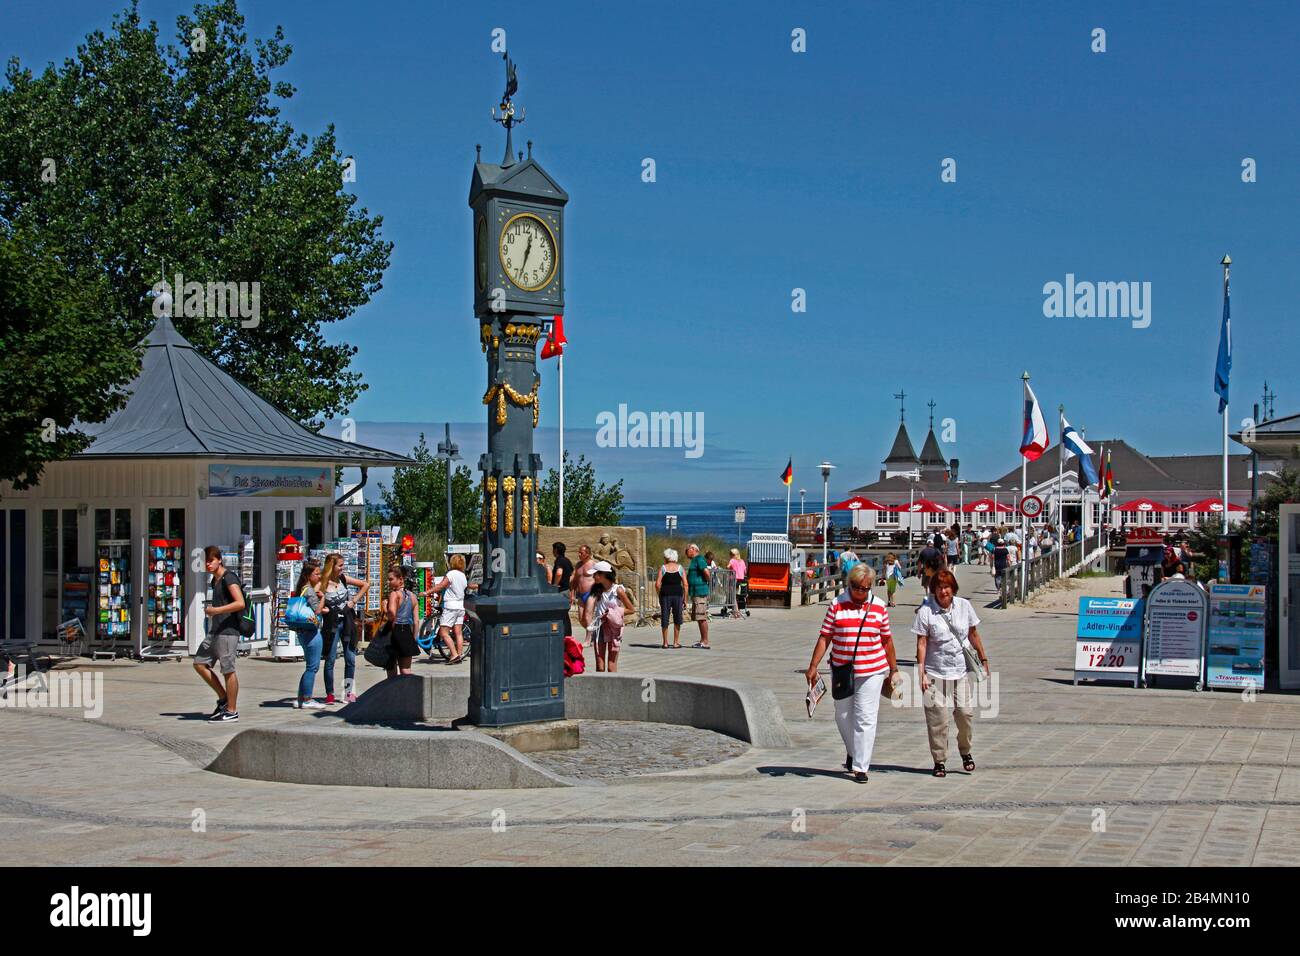 Germany, Mecklenburg-West Pomerania, Ahlbeck seaside resort, Usedom island, Baltic coast, Art Nouveau clock from 1911, pier from 1898, present appearance from 1930, only original pier in Mecklenburg-Western Pomerania, tourists, holidaymakers Stock Photo